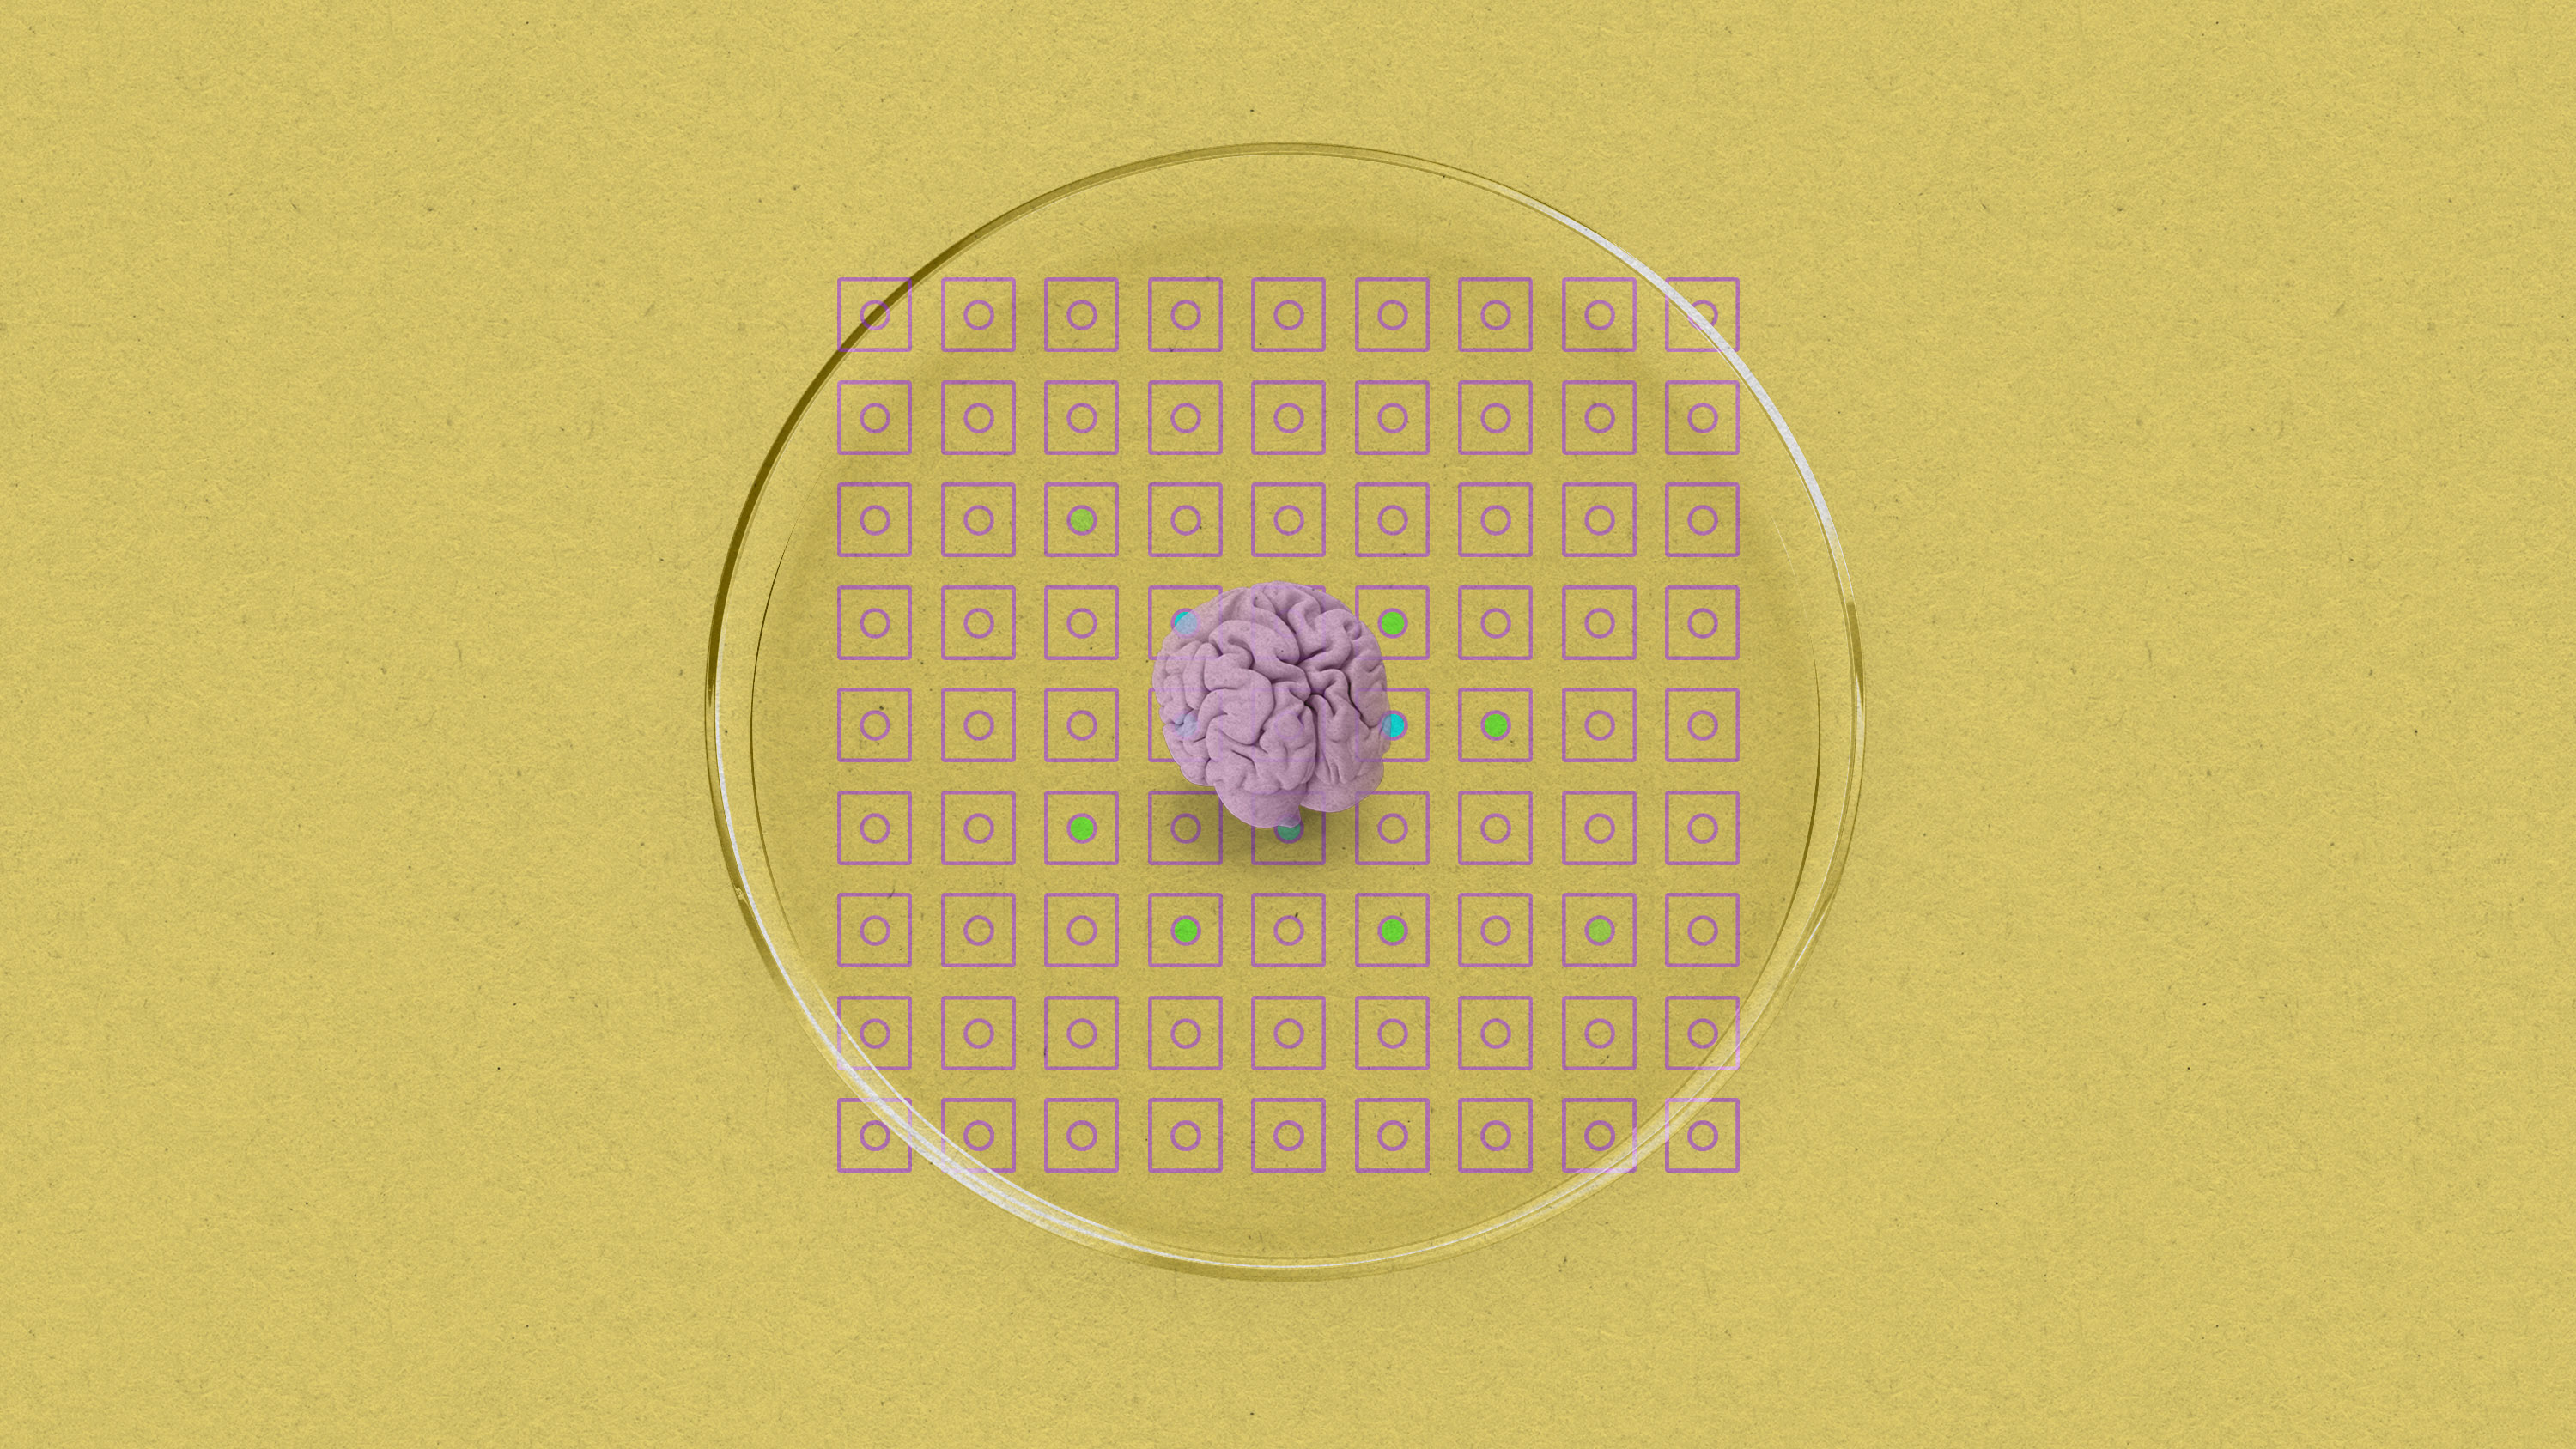 microbrain clump in a petri dish resting on a sensor array respresented by squares with lit or unlit circles in the center